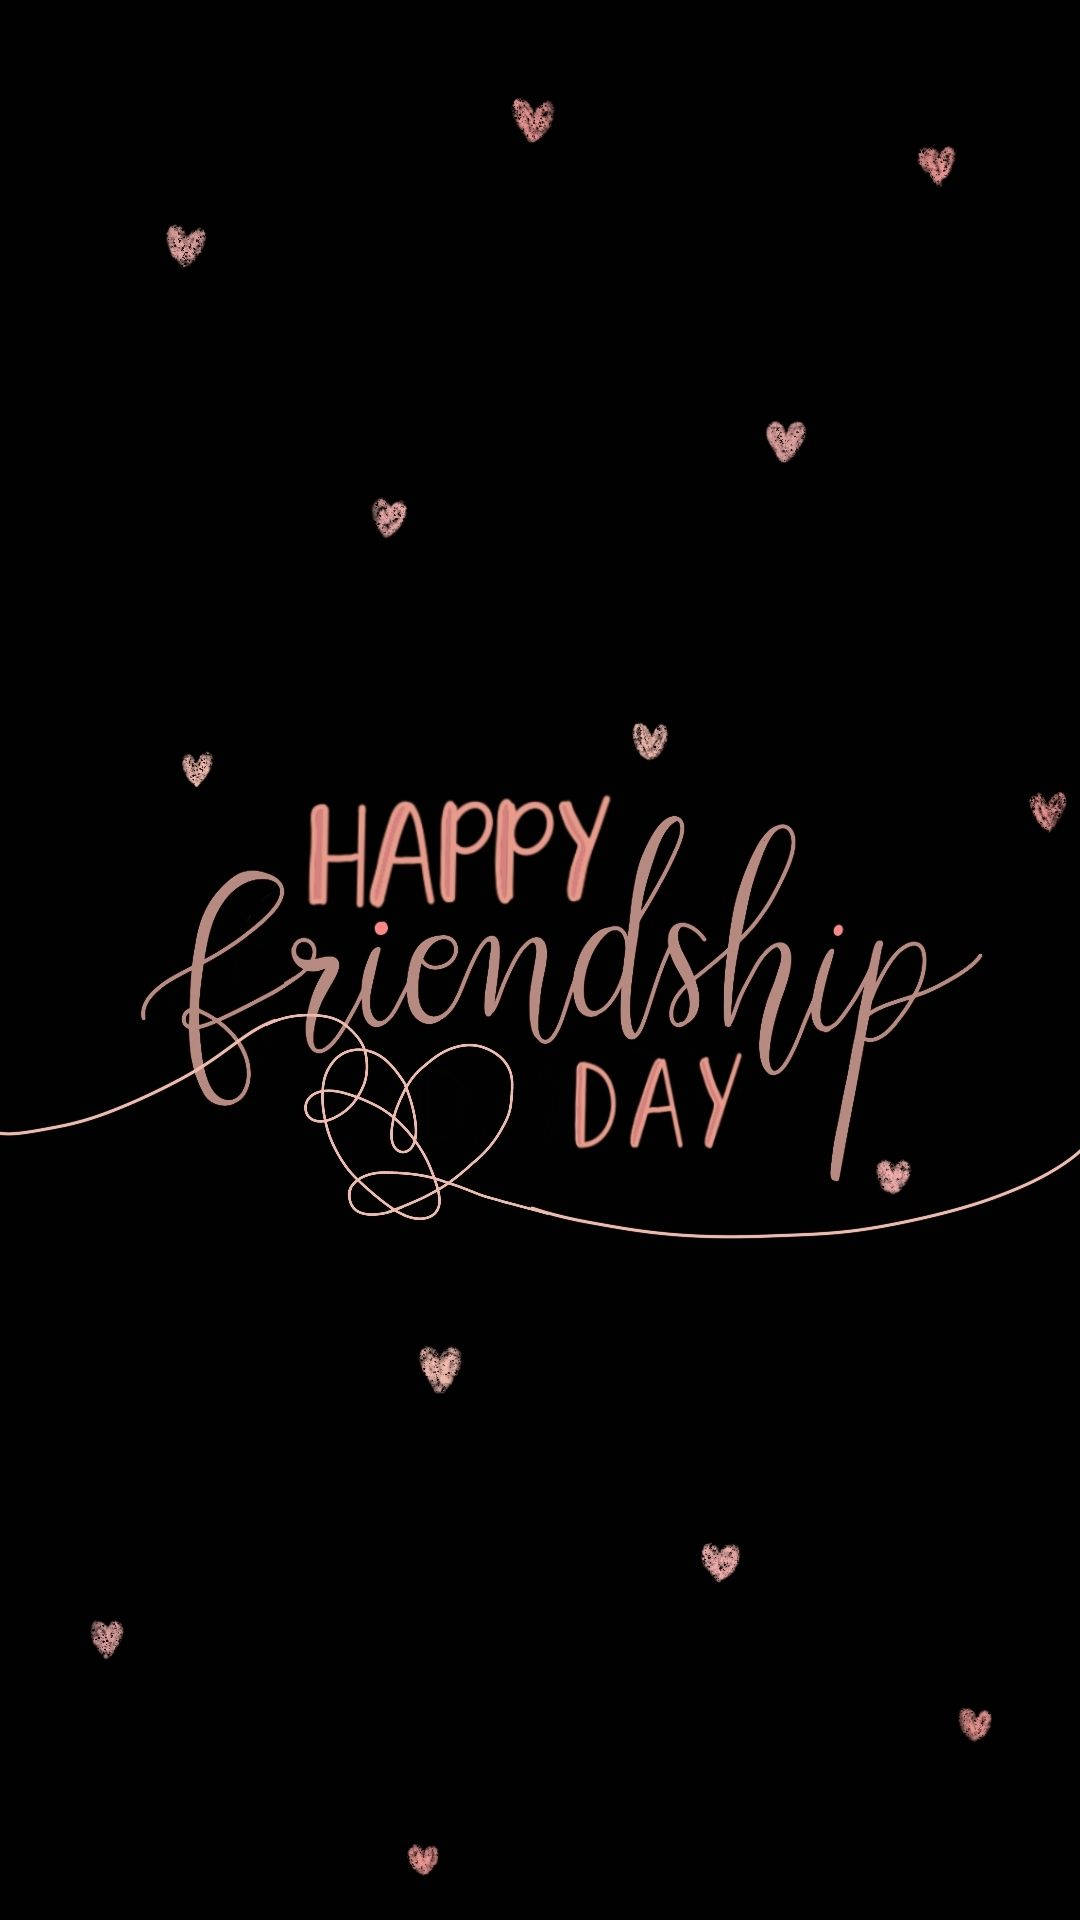 Happy Friendship Day With Hearts Wallpaper